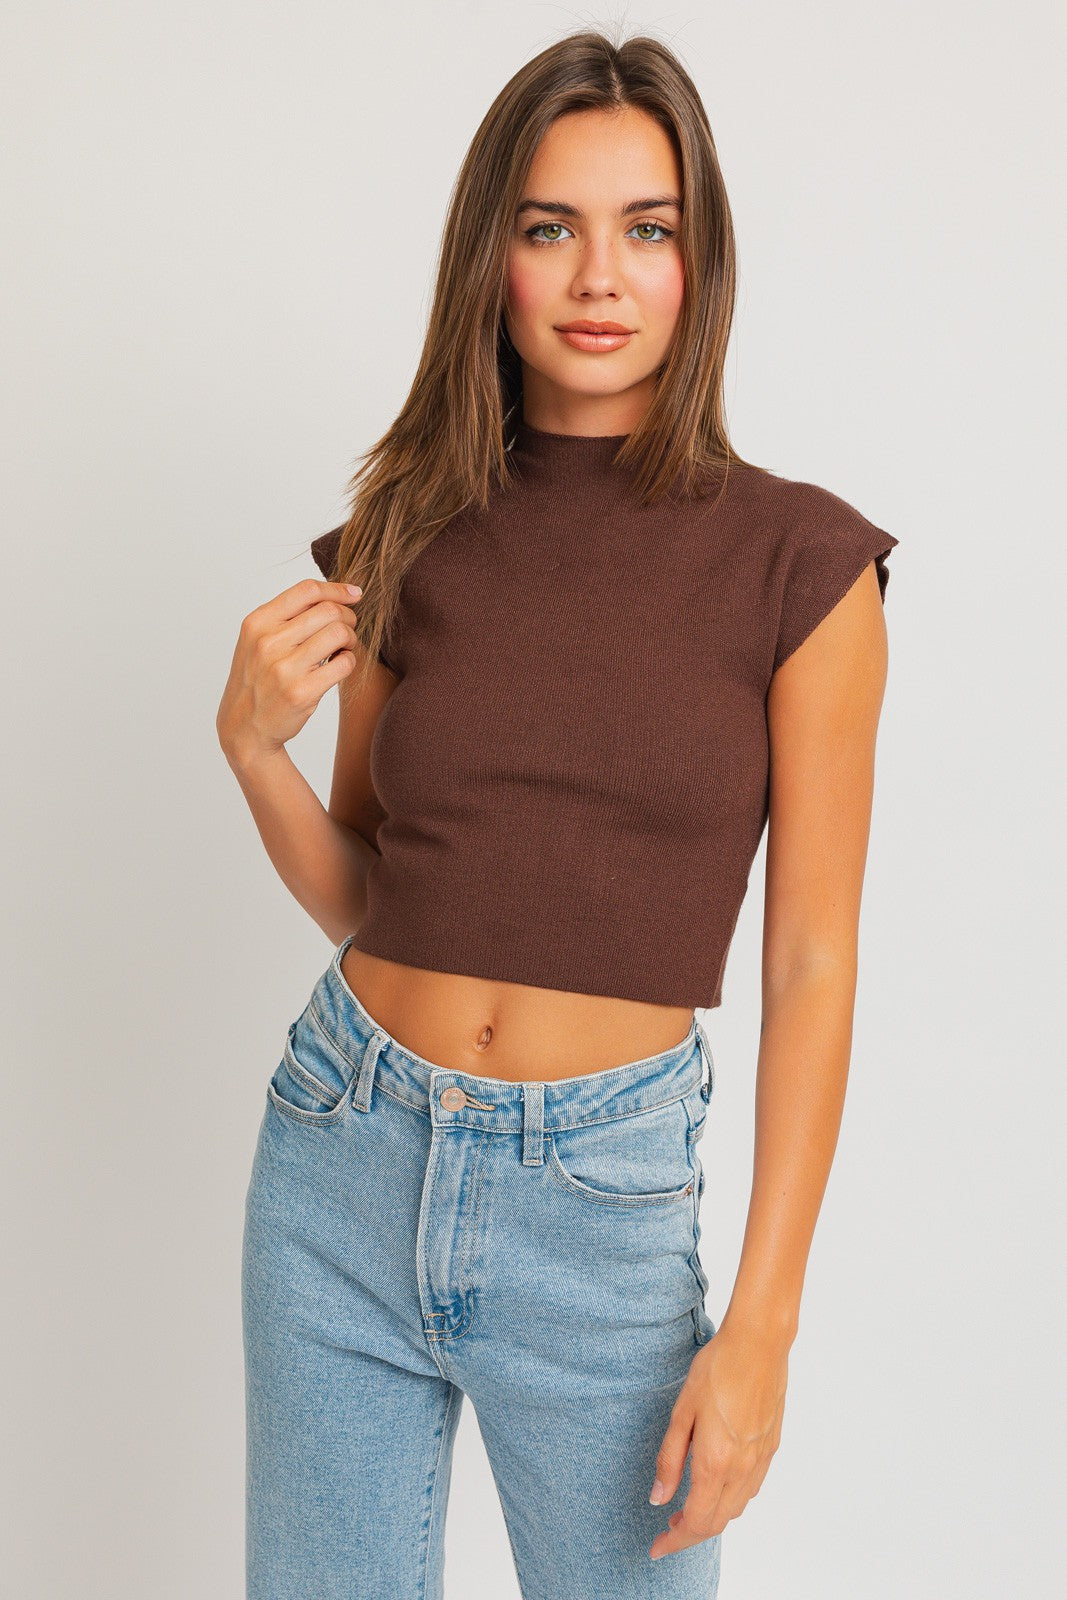 The Stealing Glances High Neck Sweater Top